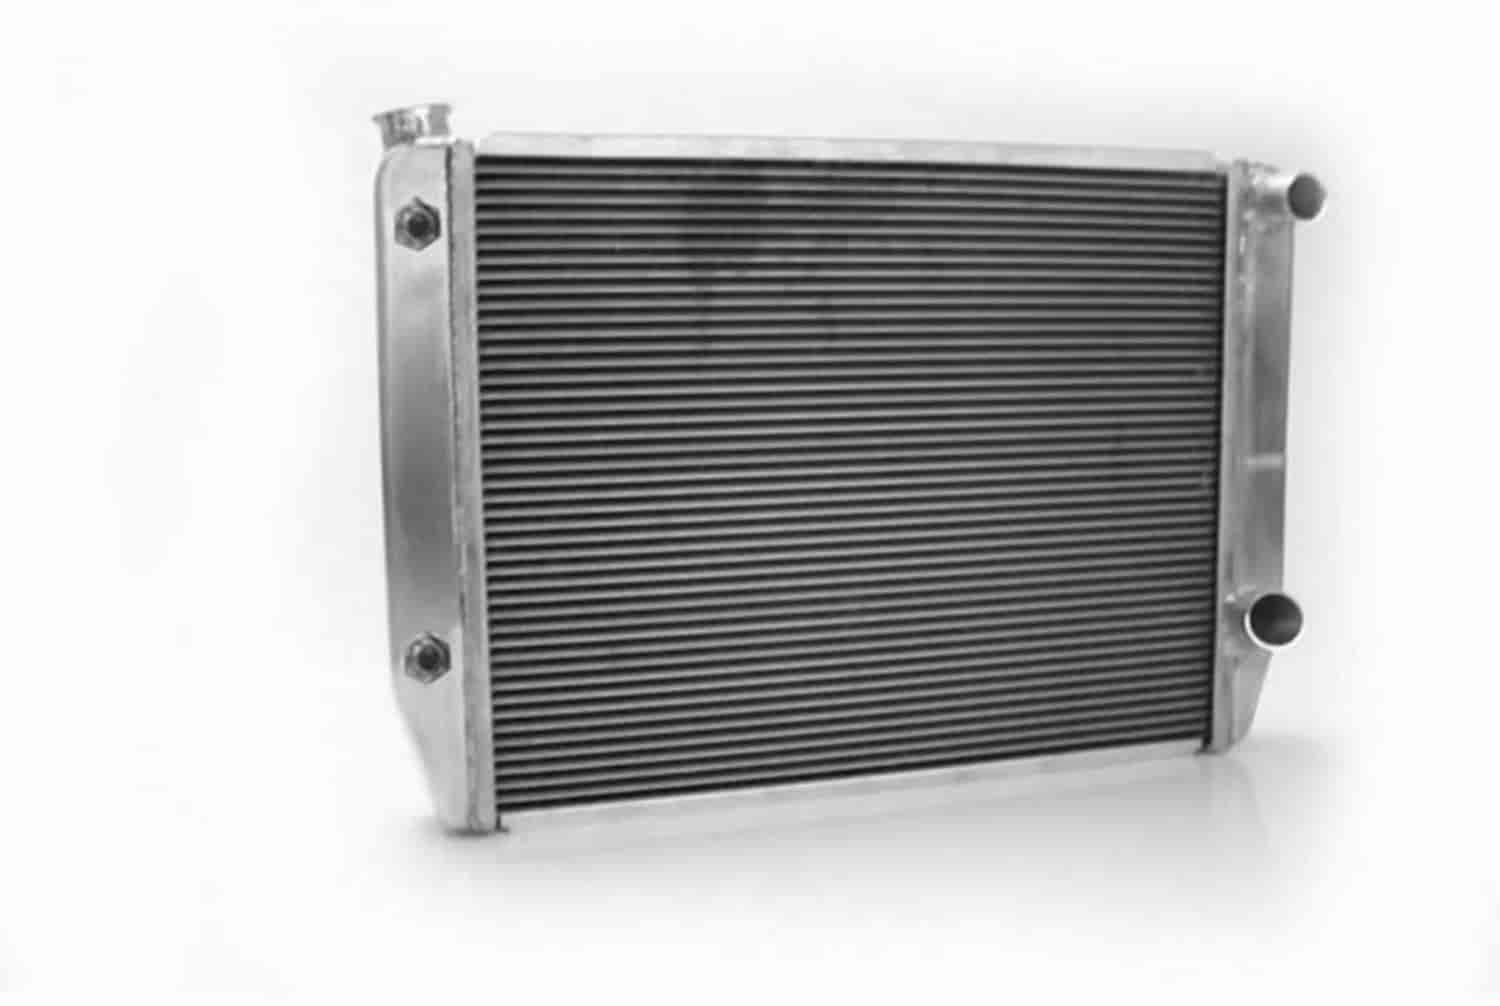 MegaCool Universal Fit Radiator Dual Pass Crossflow Design 27.50" x 19" with Transmission Cooler